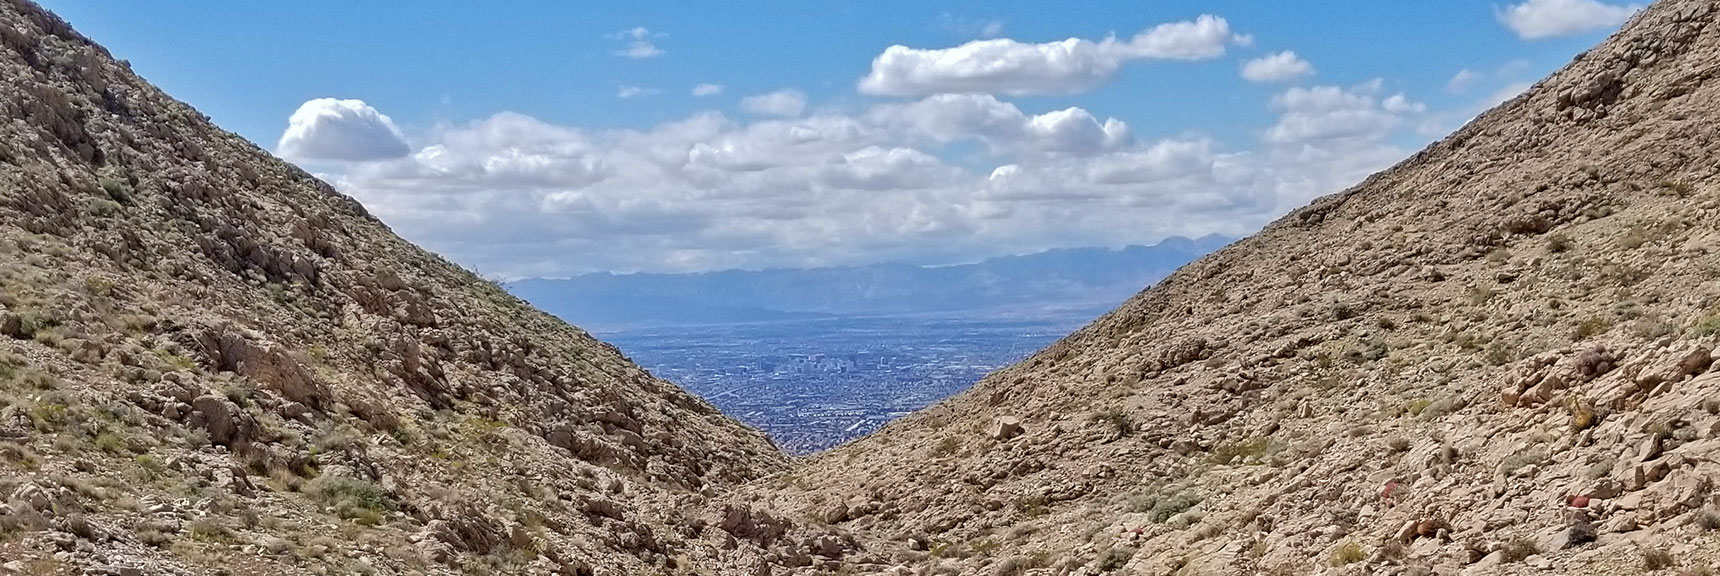 View of Las Vegas Valley from Saddle of Frenchman Mountain, Nevada